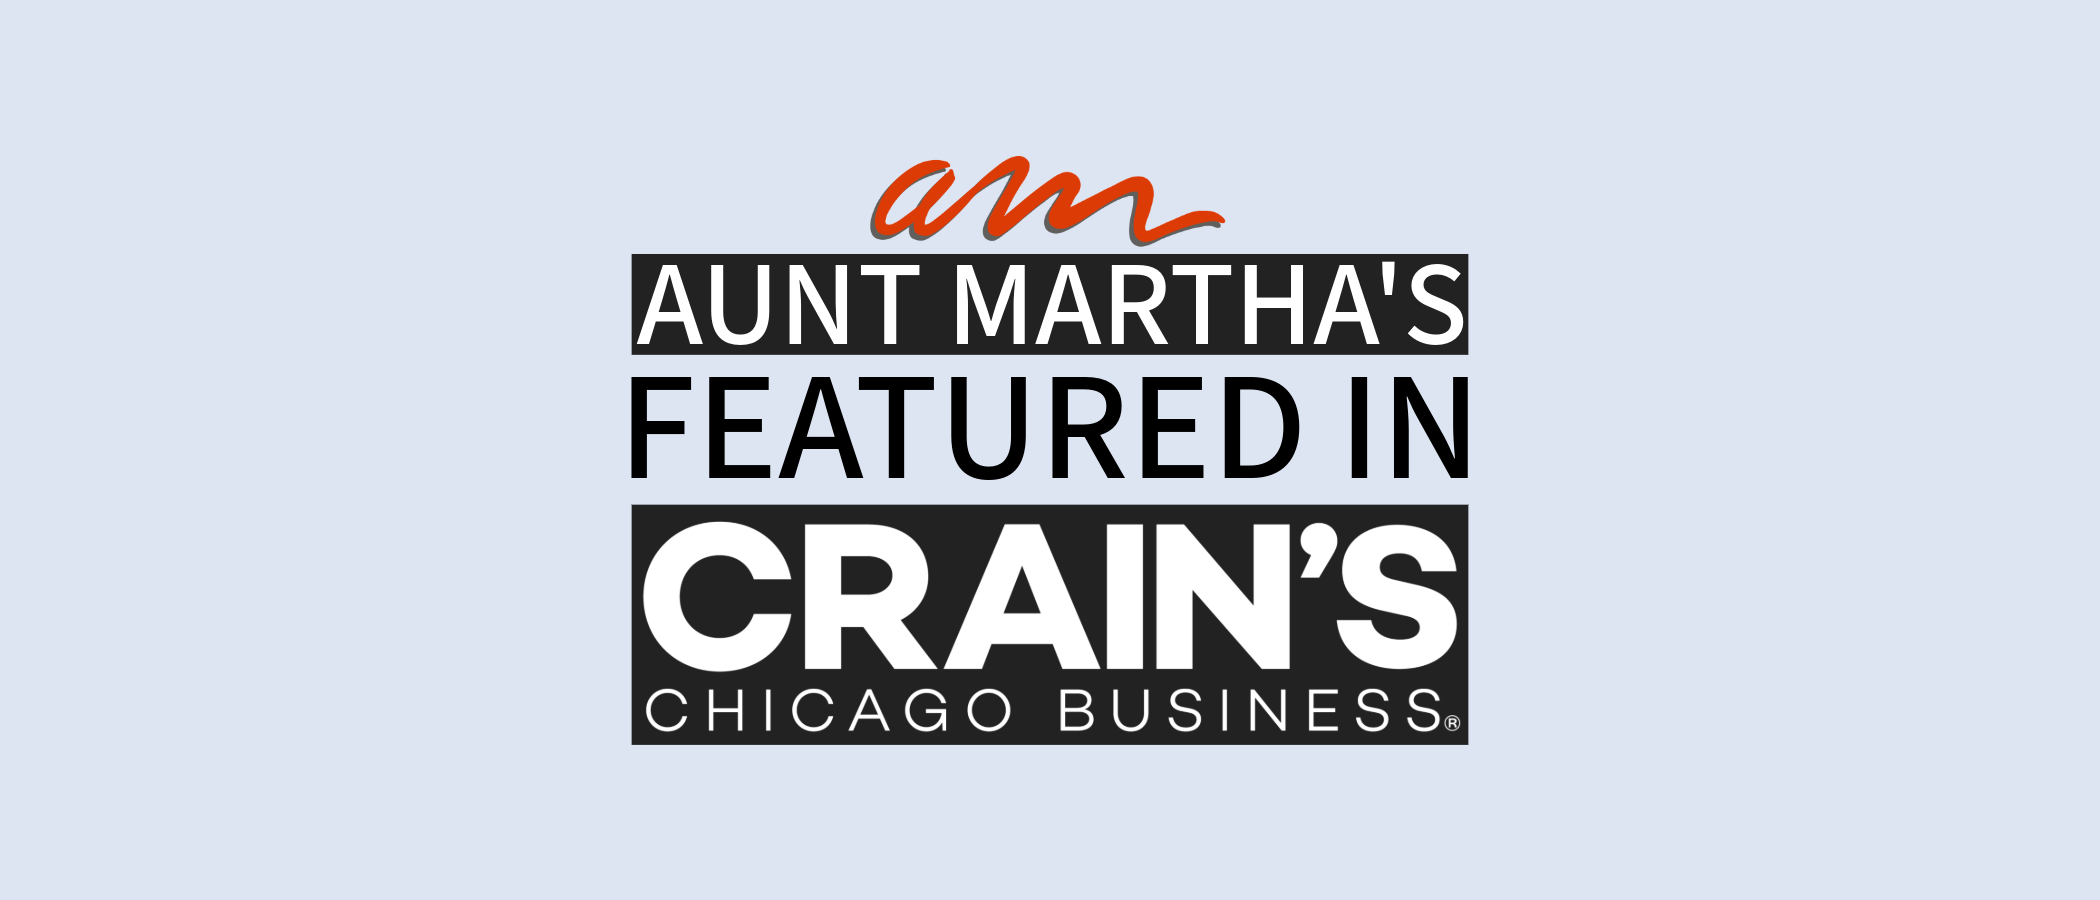 Aunt Martha's script graphic mark and text reading "Aunt Martha's Featured In Crain's Chicago Business"